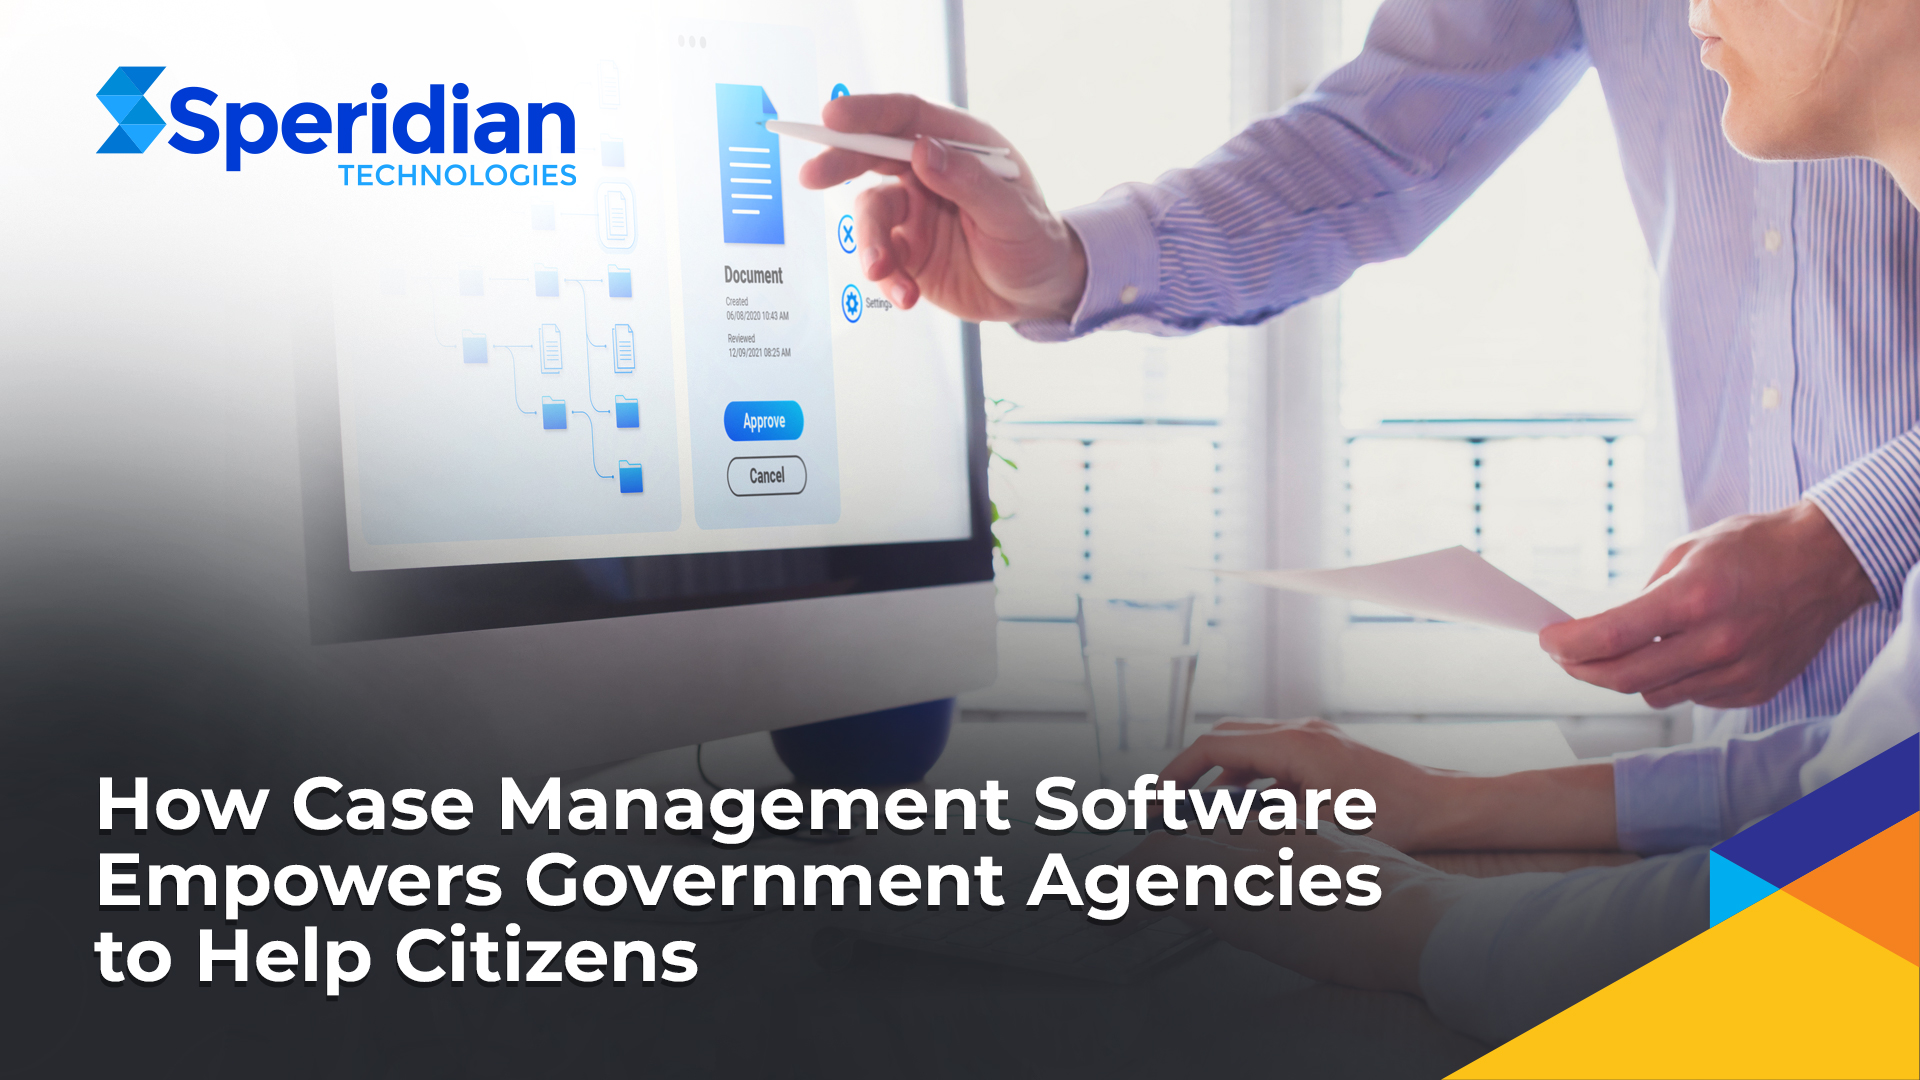 How Case Management Software Empowers Government Agencies to Help Citizens